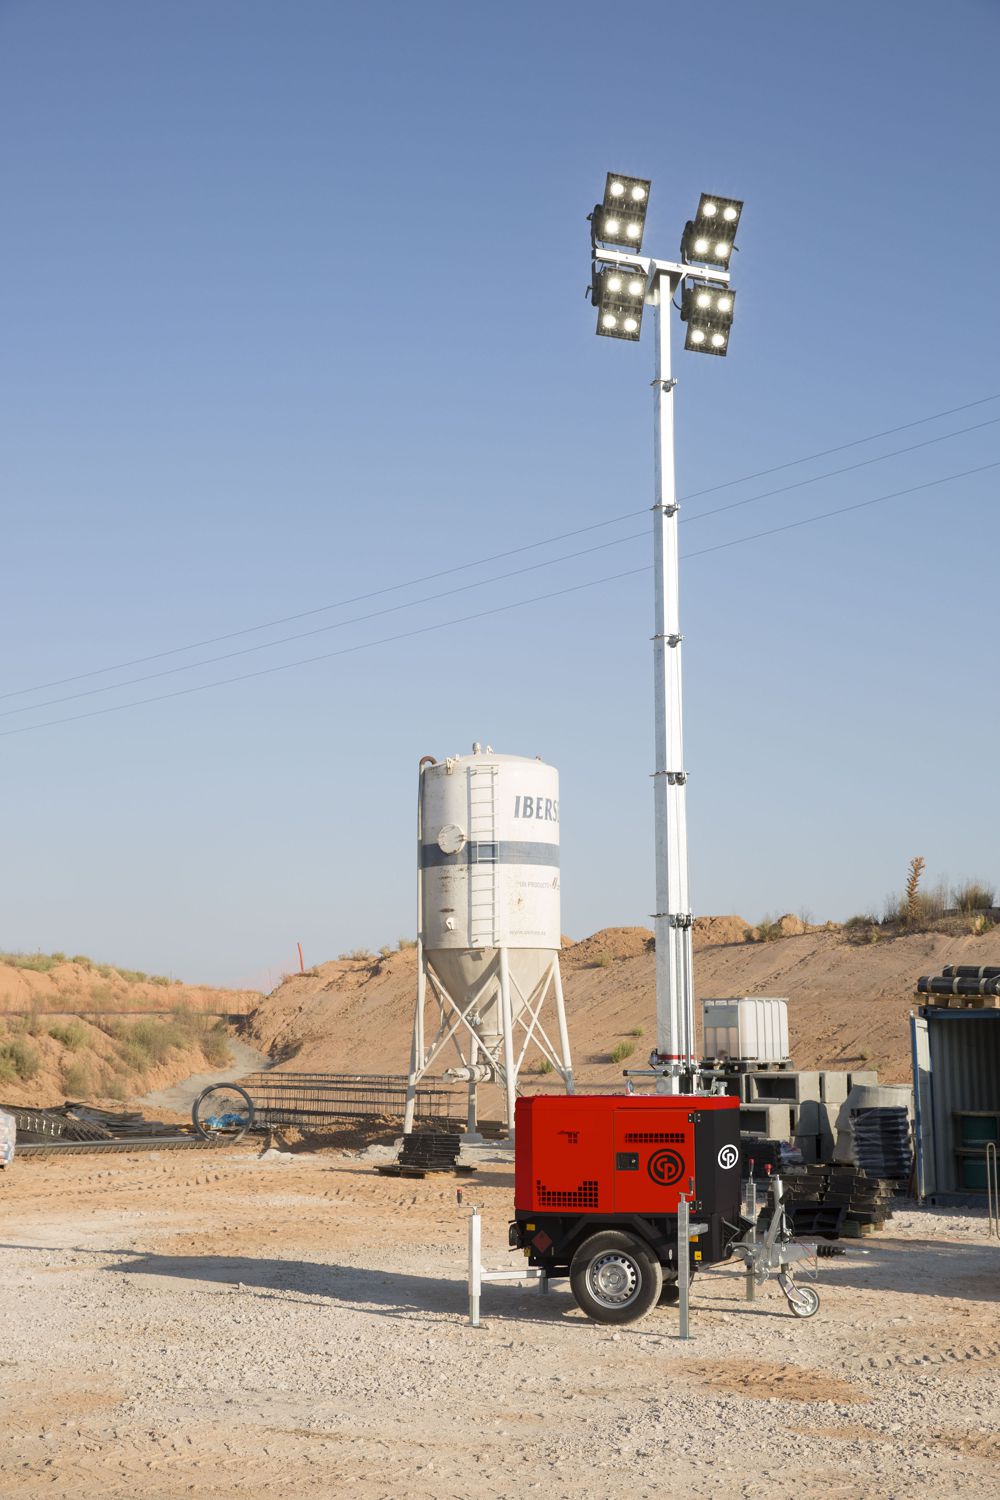 What to consider when purchasing a light tower